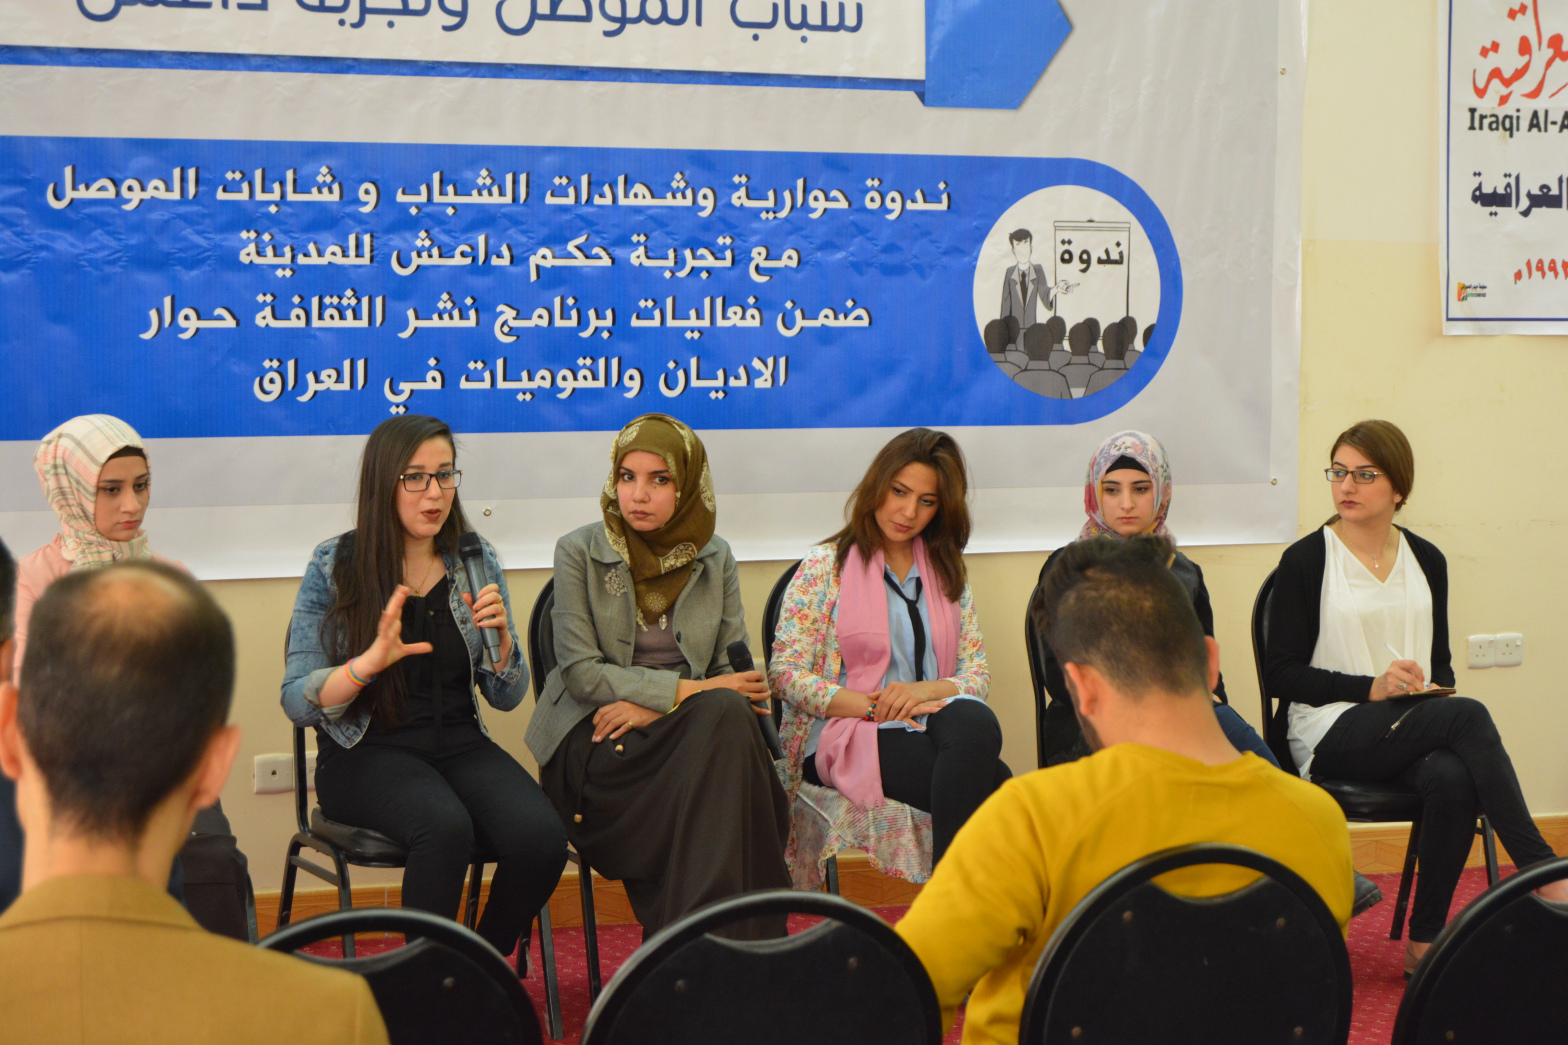 In Najaf, young women from Mosul and their testimonies about the period of ISIS control of the city